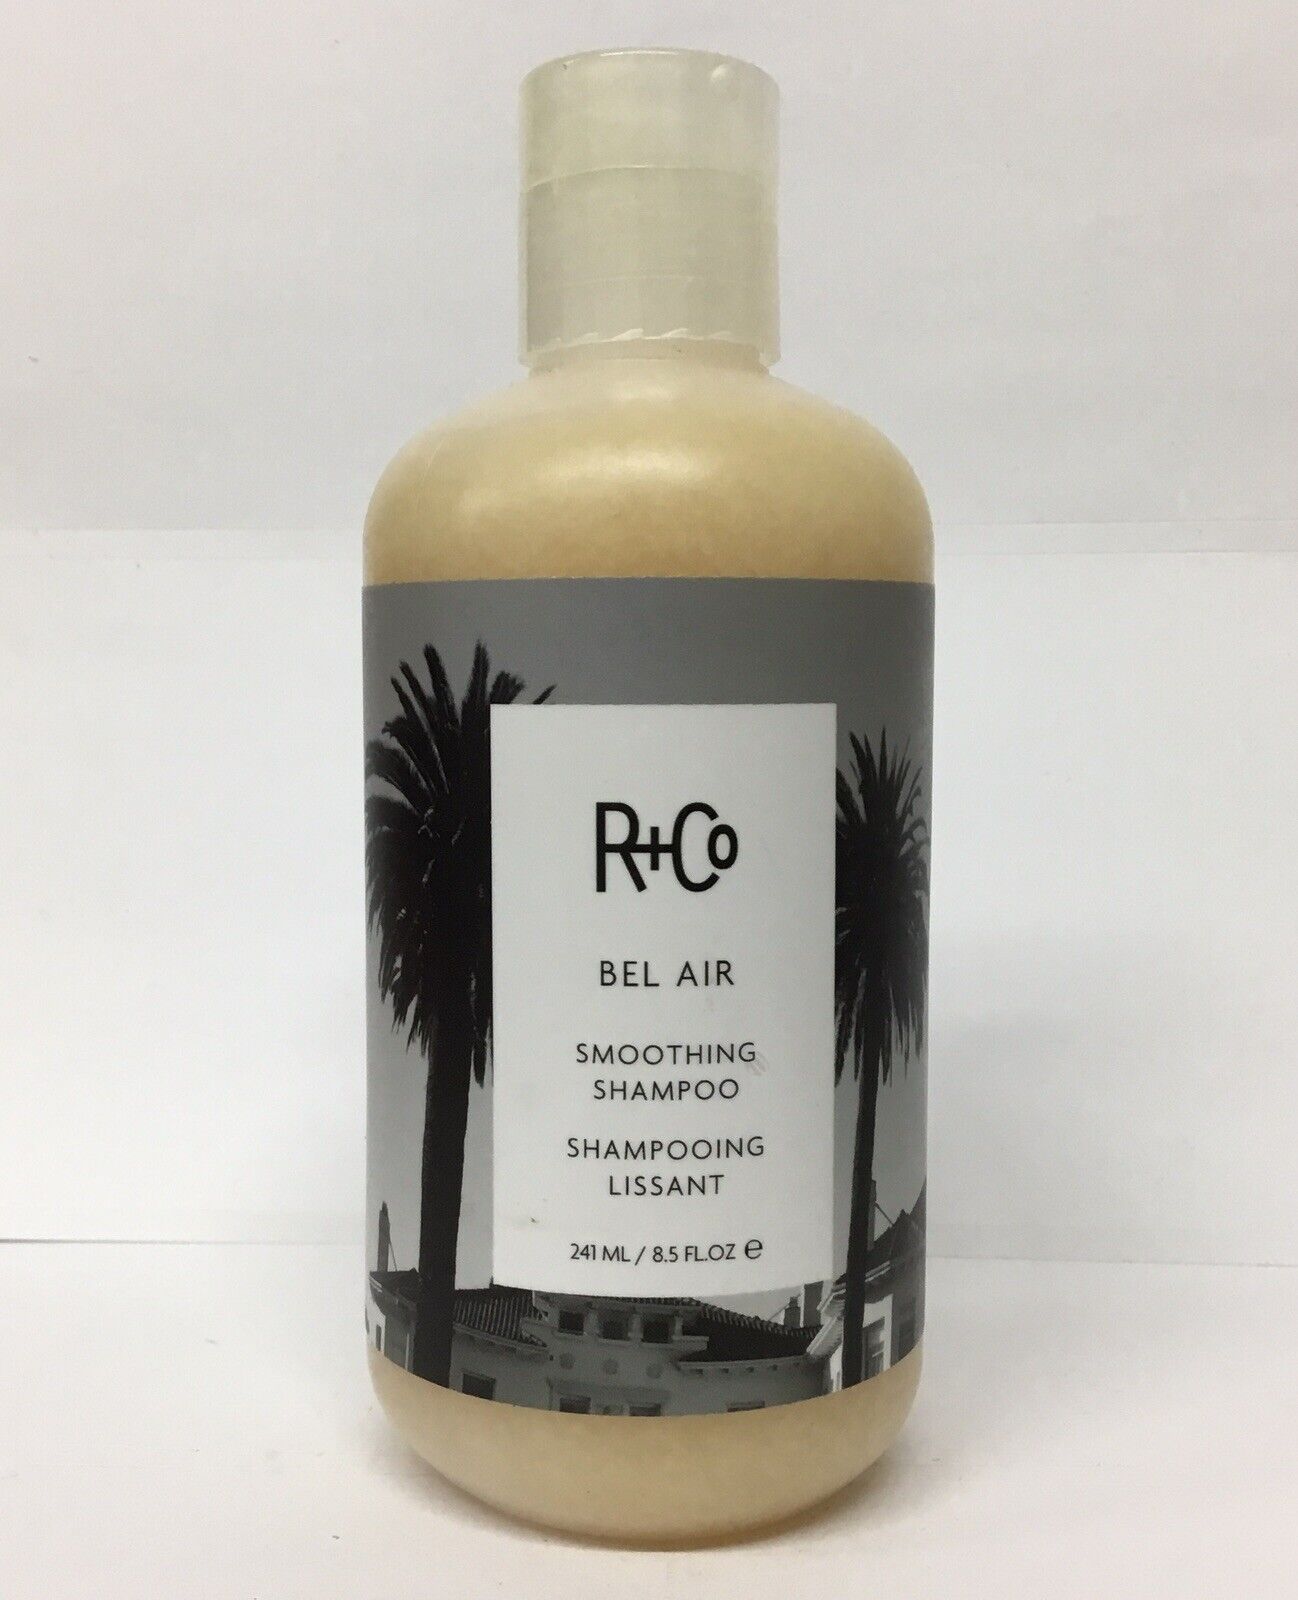 R+Co Bel Air Smoothing Shampoo | 8.5 oz | As Pictured 